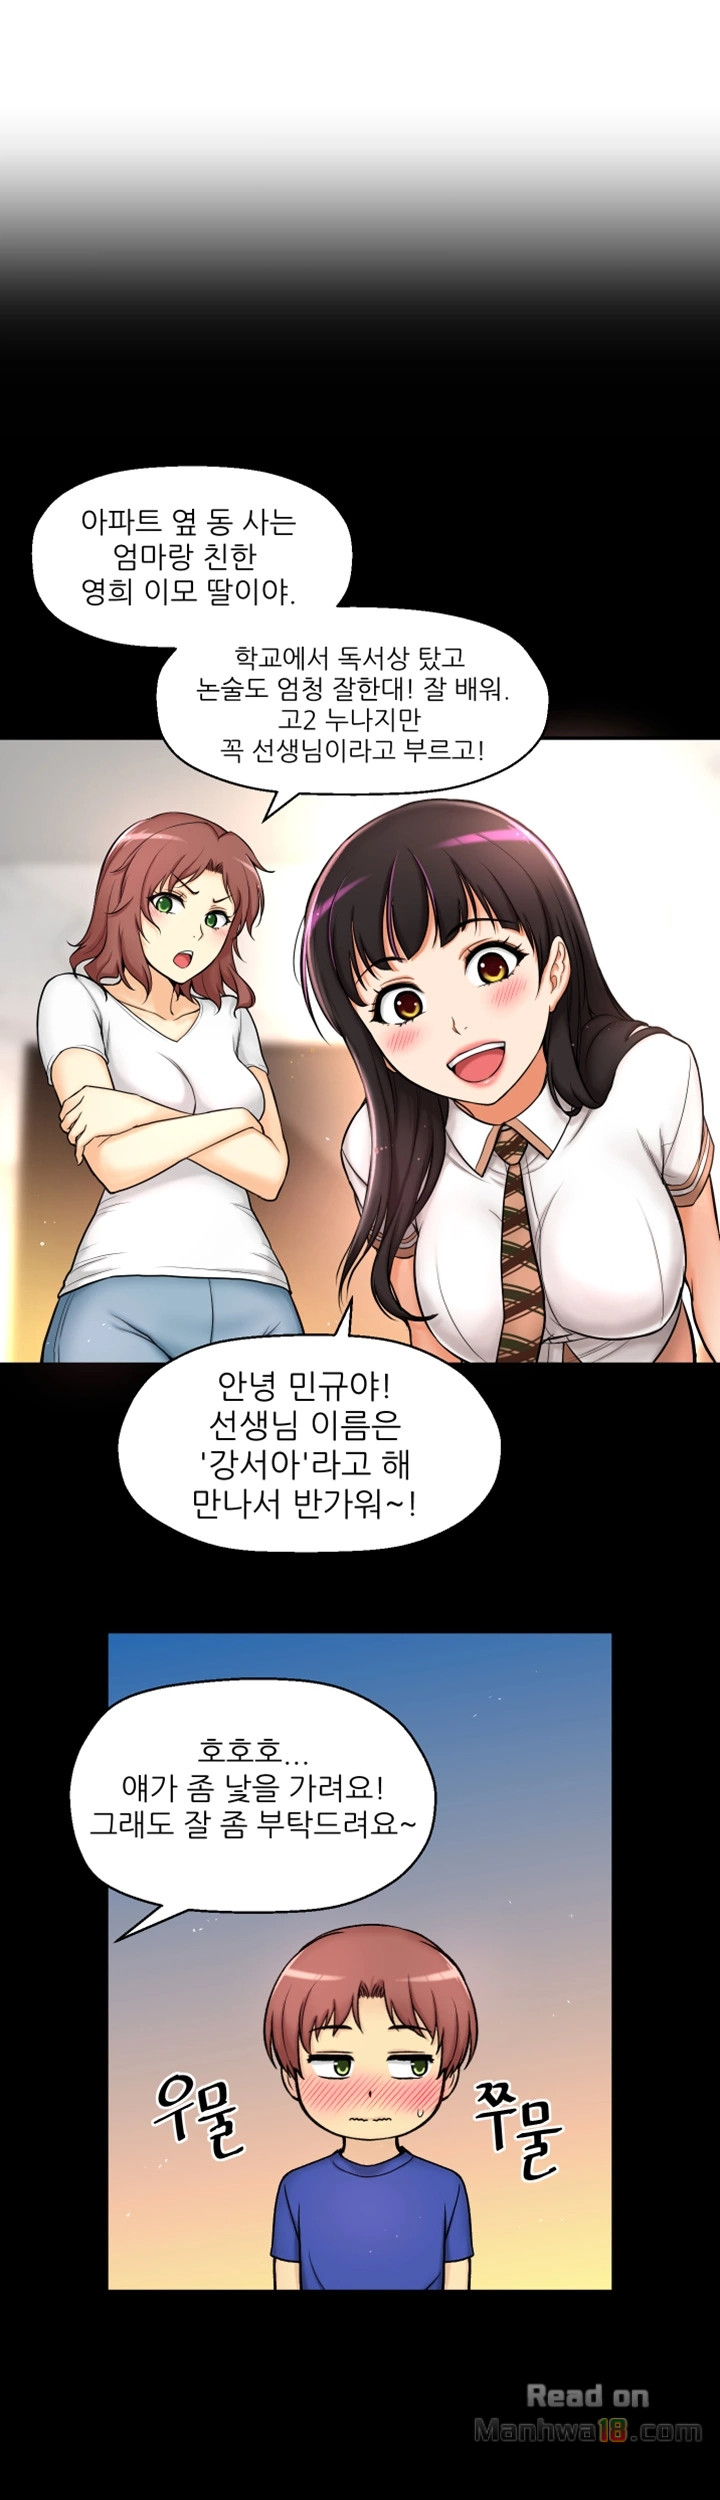 She Is Young 2 Raw - Chapter 1 Page 35